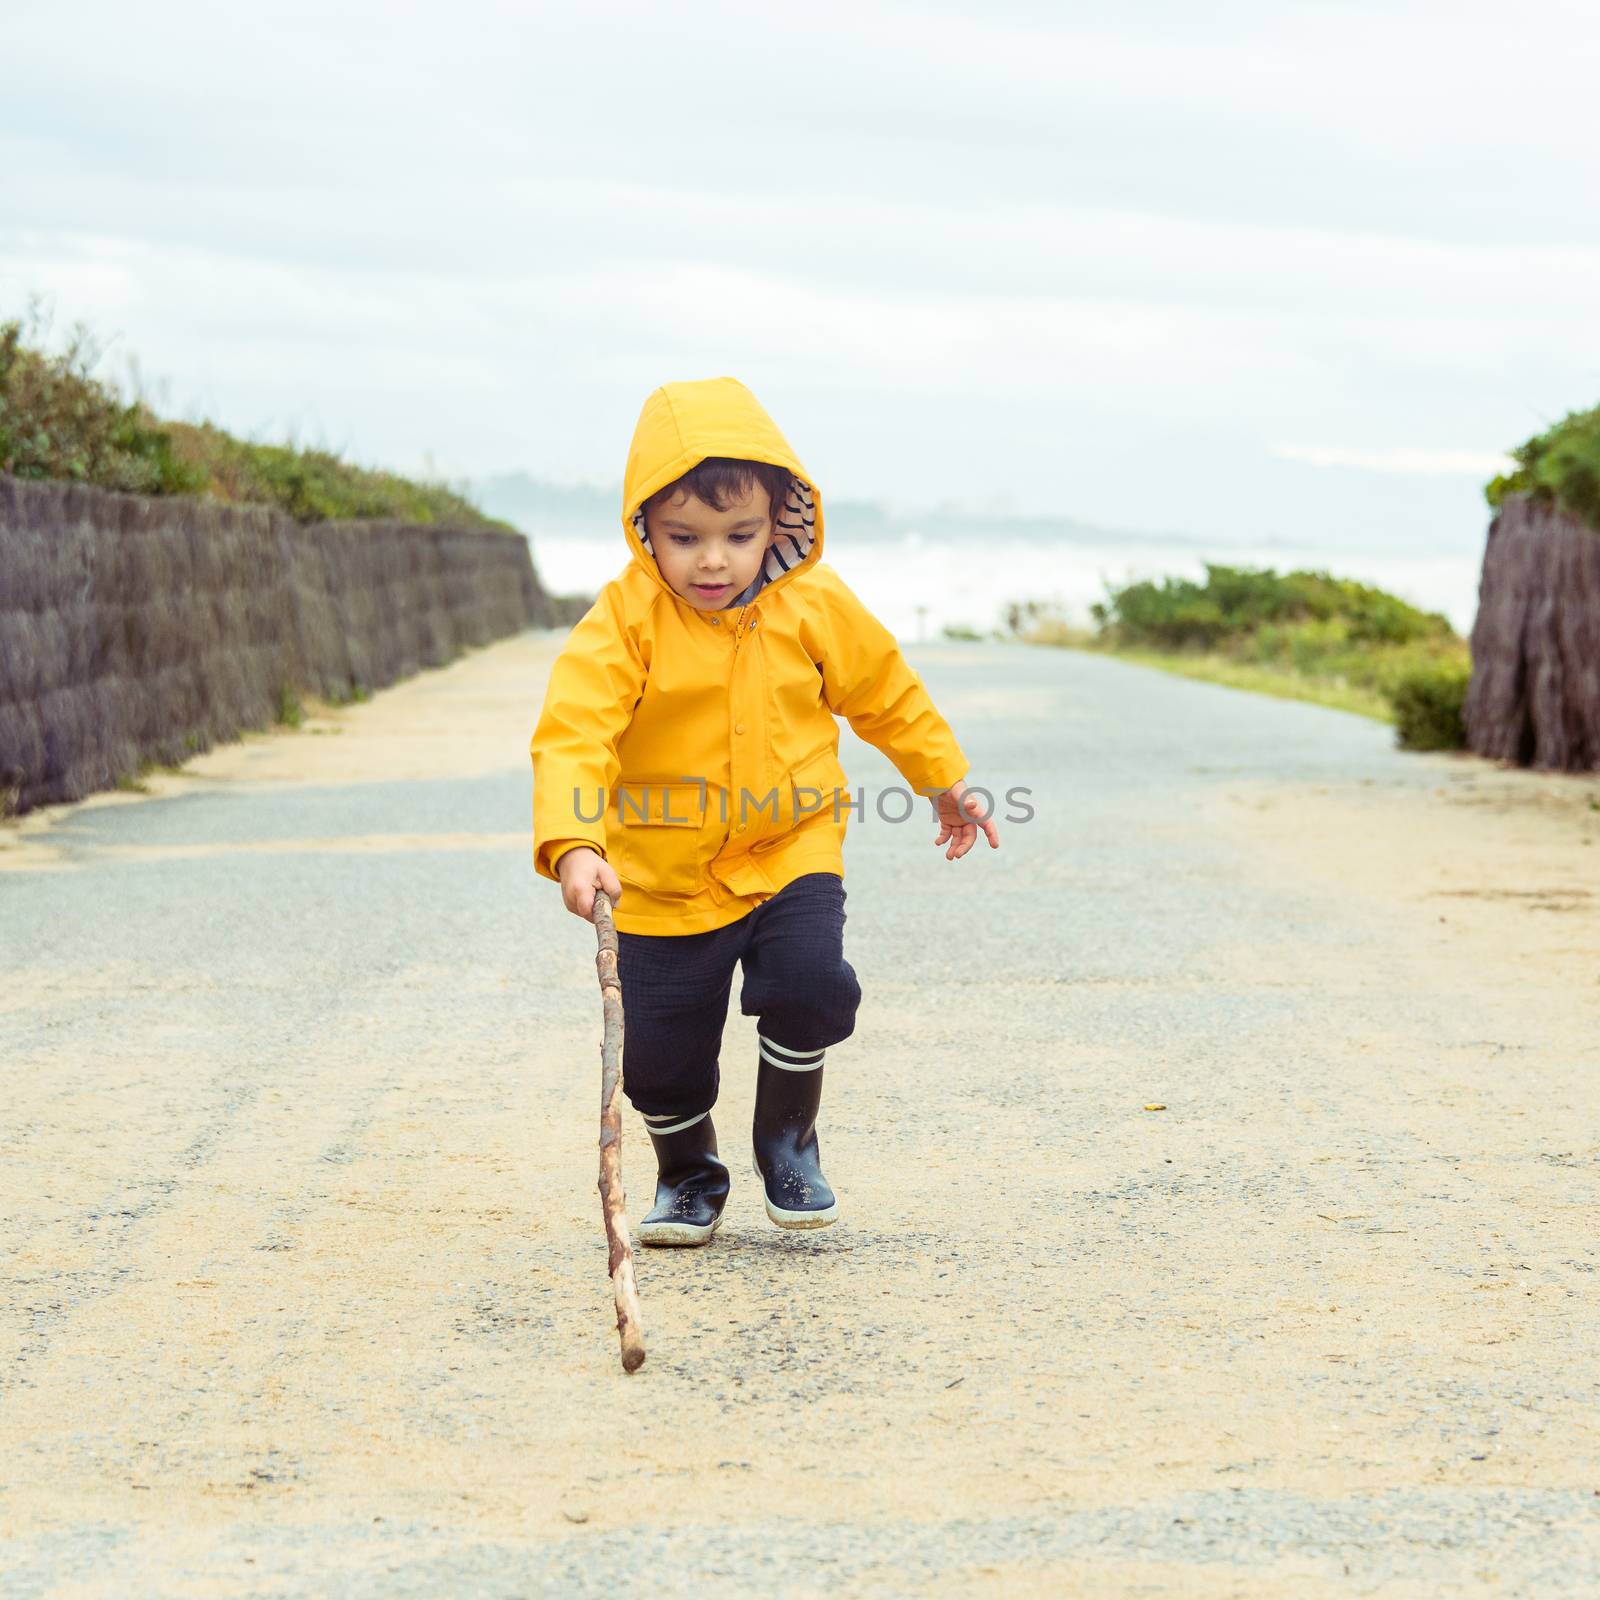 Little boy playing with wood stick, toddler wearing yellow raincoat and gumboots, coastal area